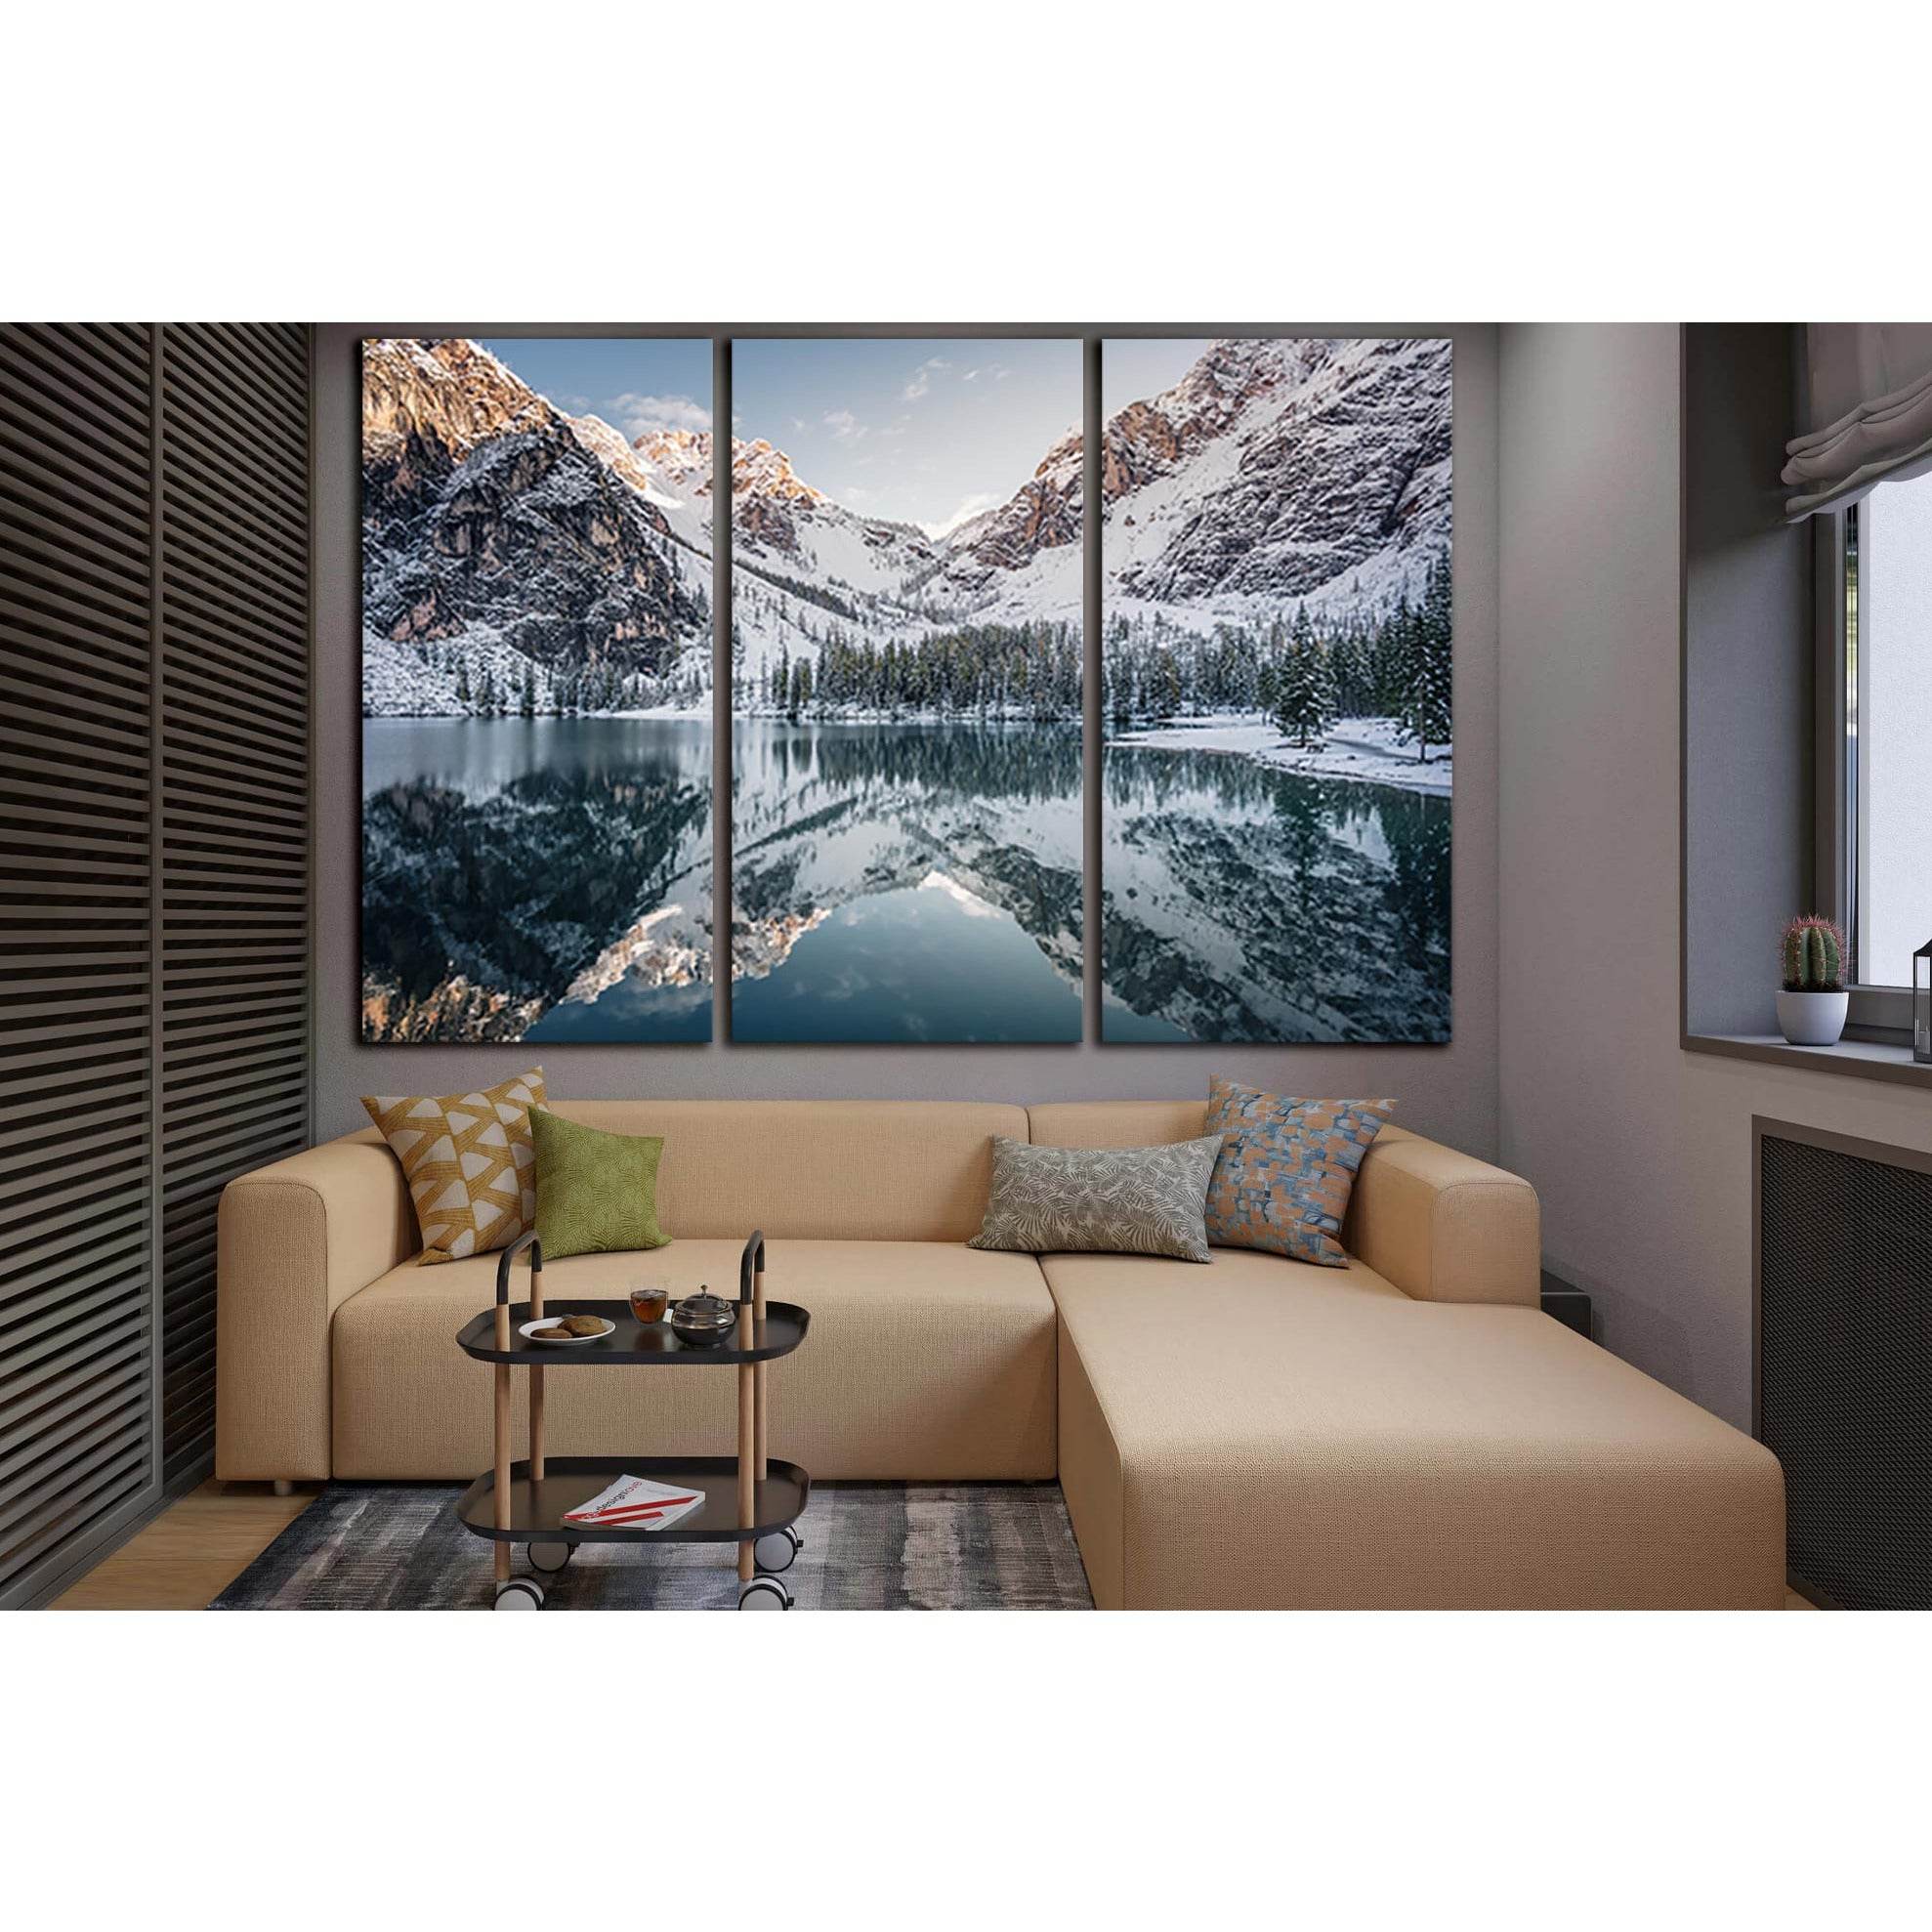 Reflection Of Winter Mountains In The Lake №SL1589 Ready to Hang Canvas Print